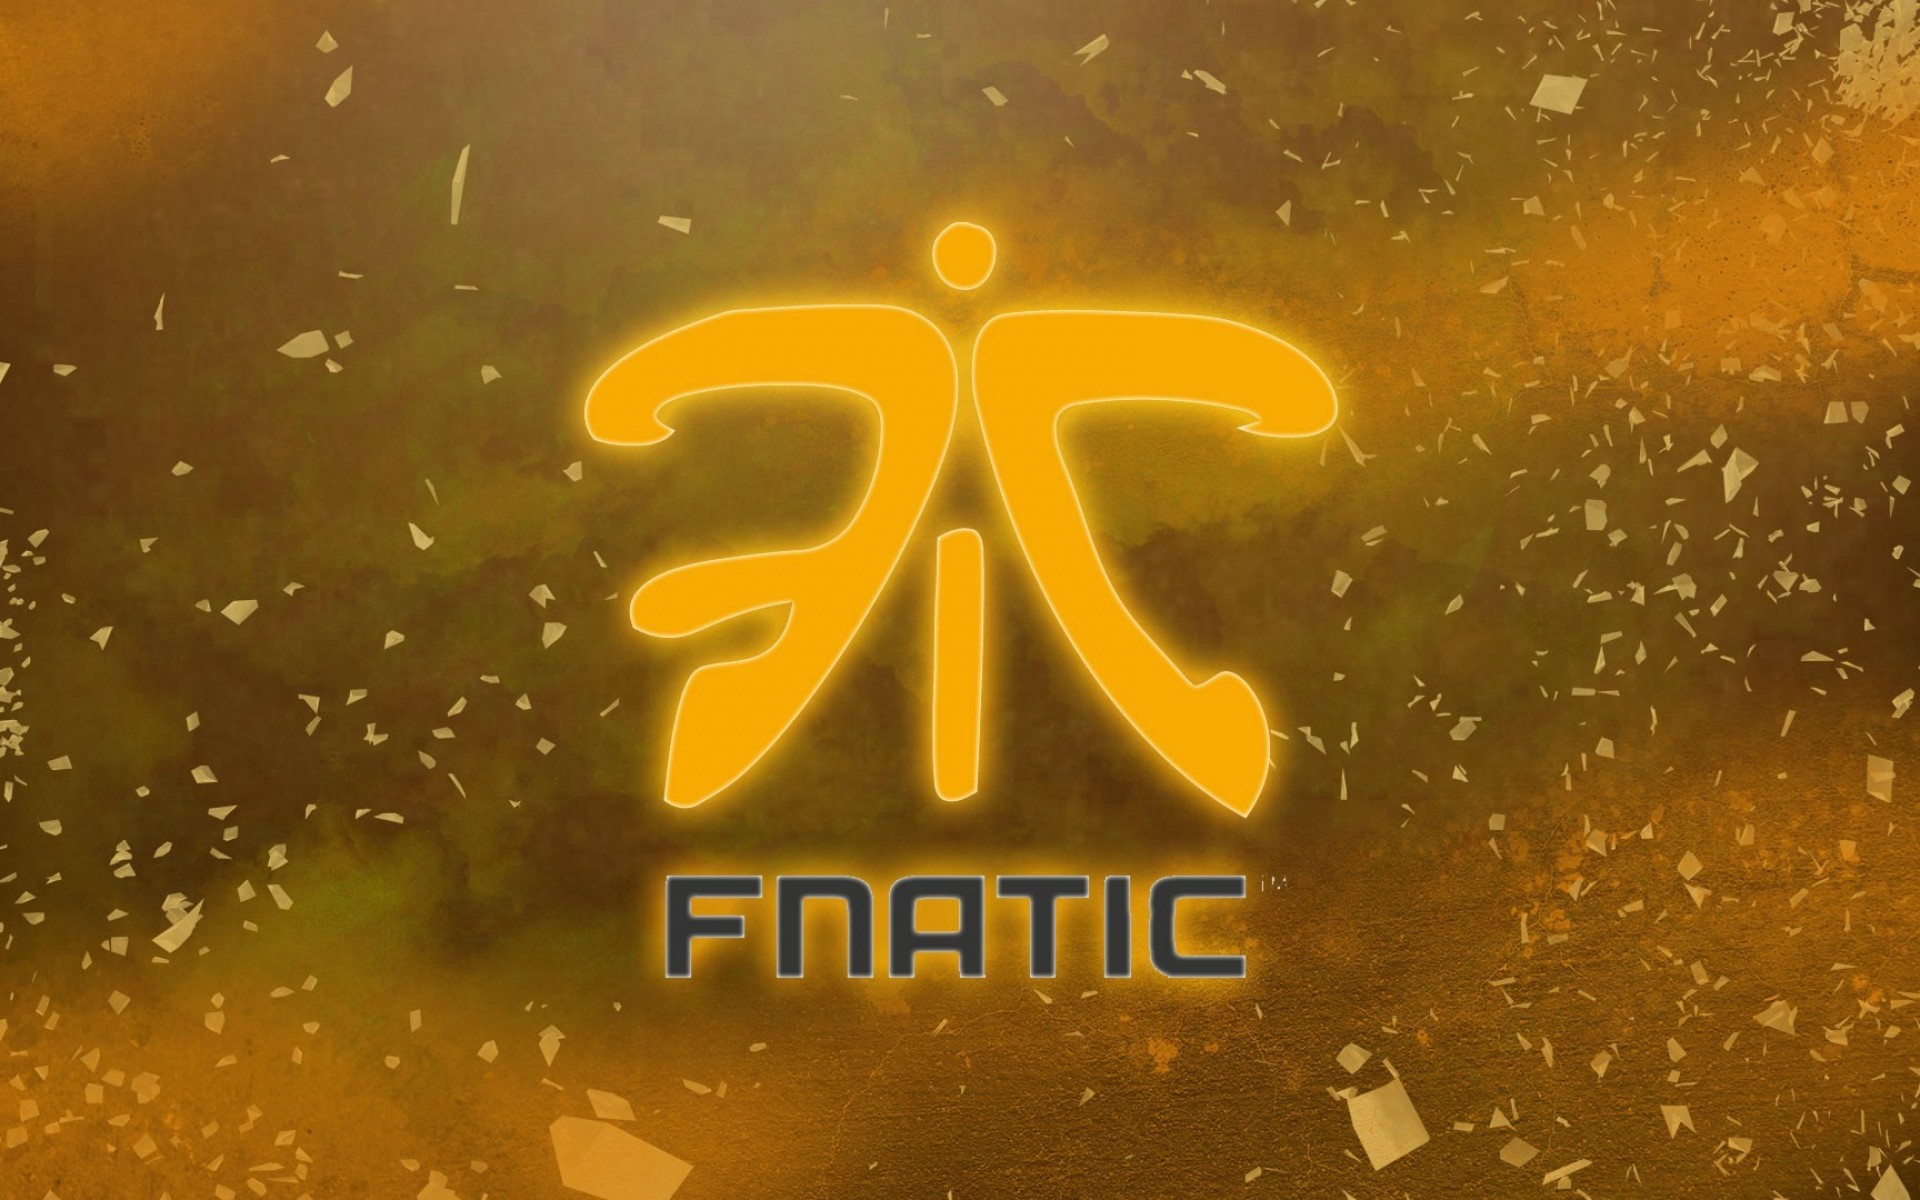 video game, fnatic, esports, gaming team